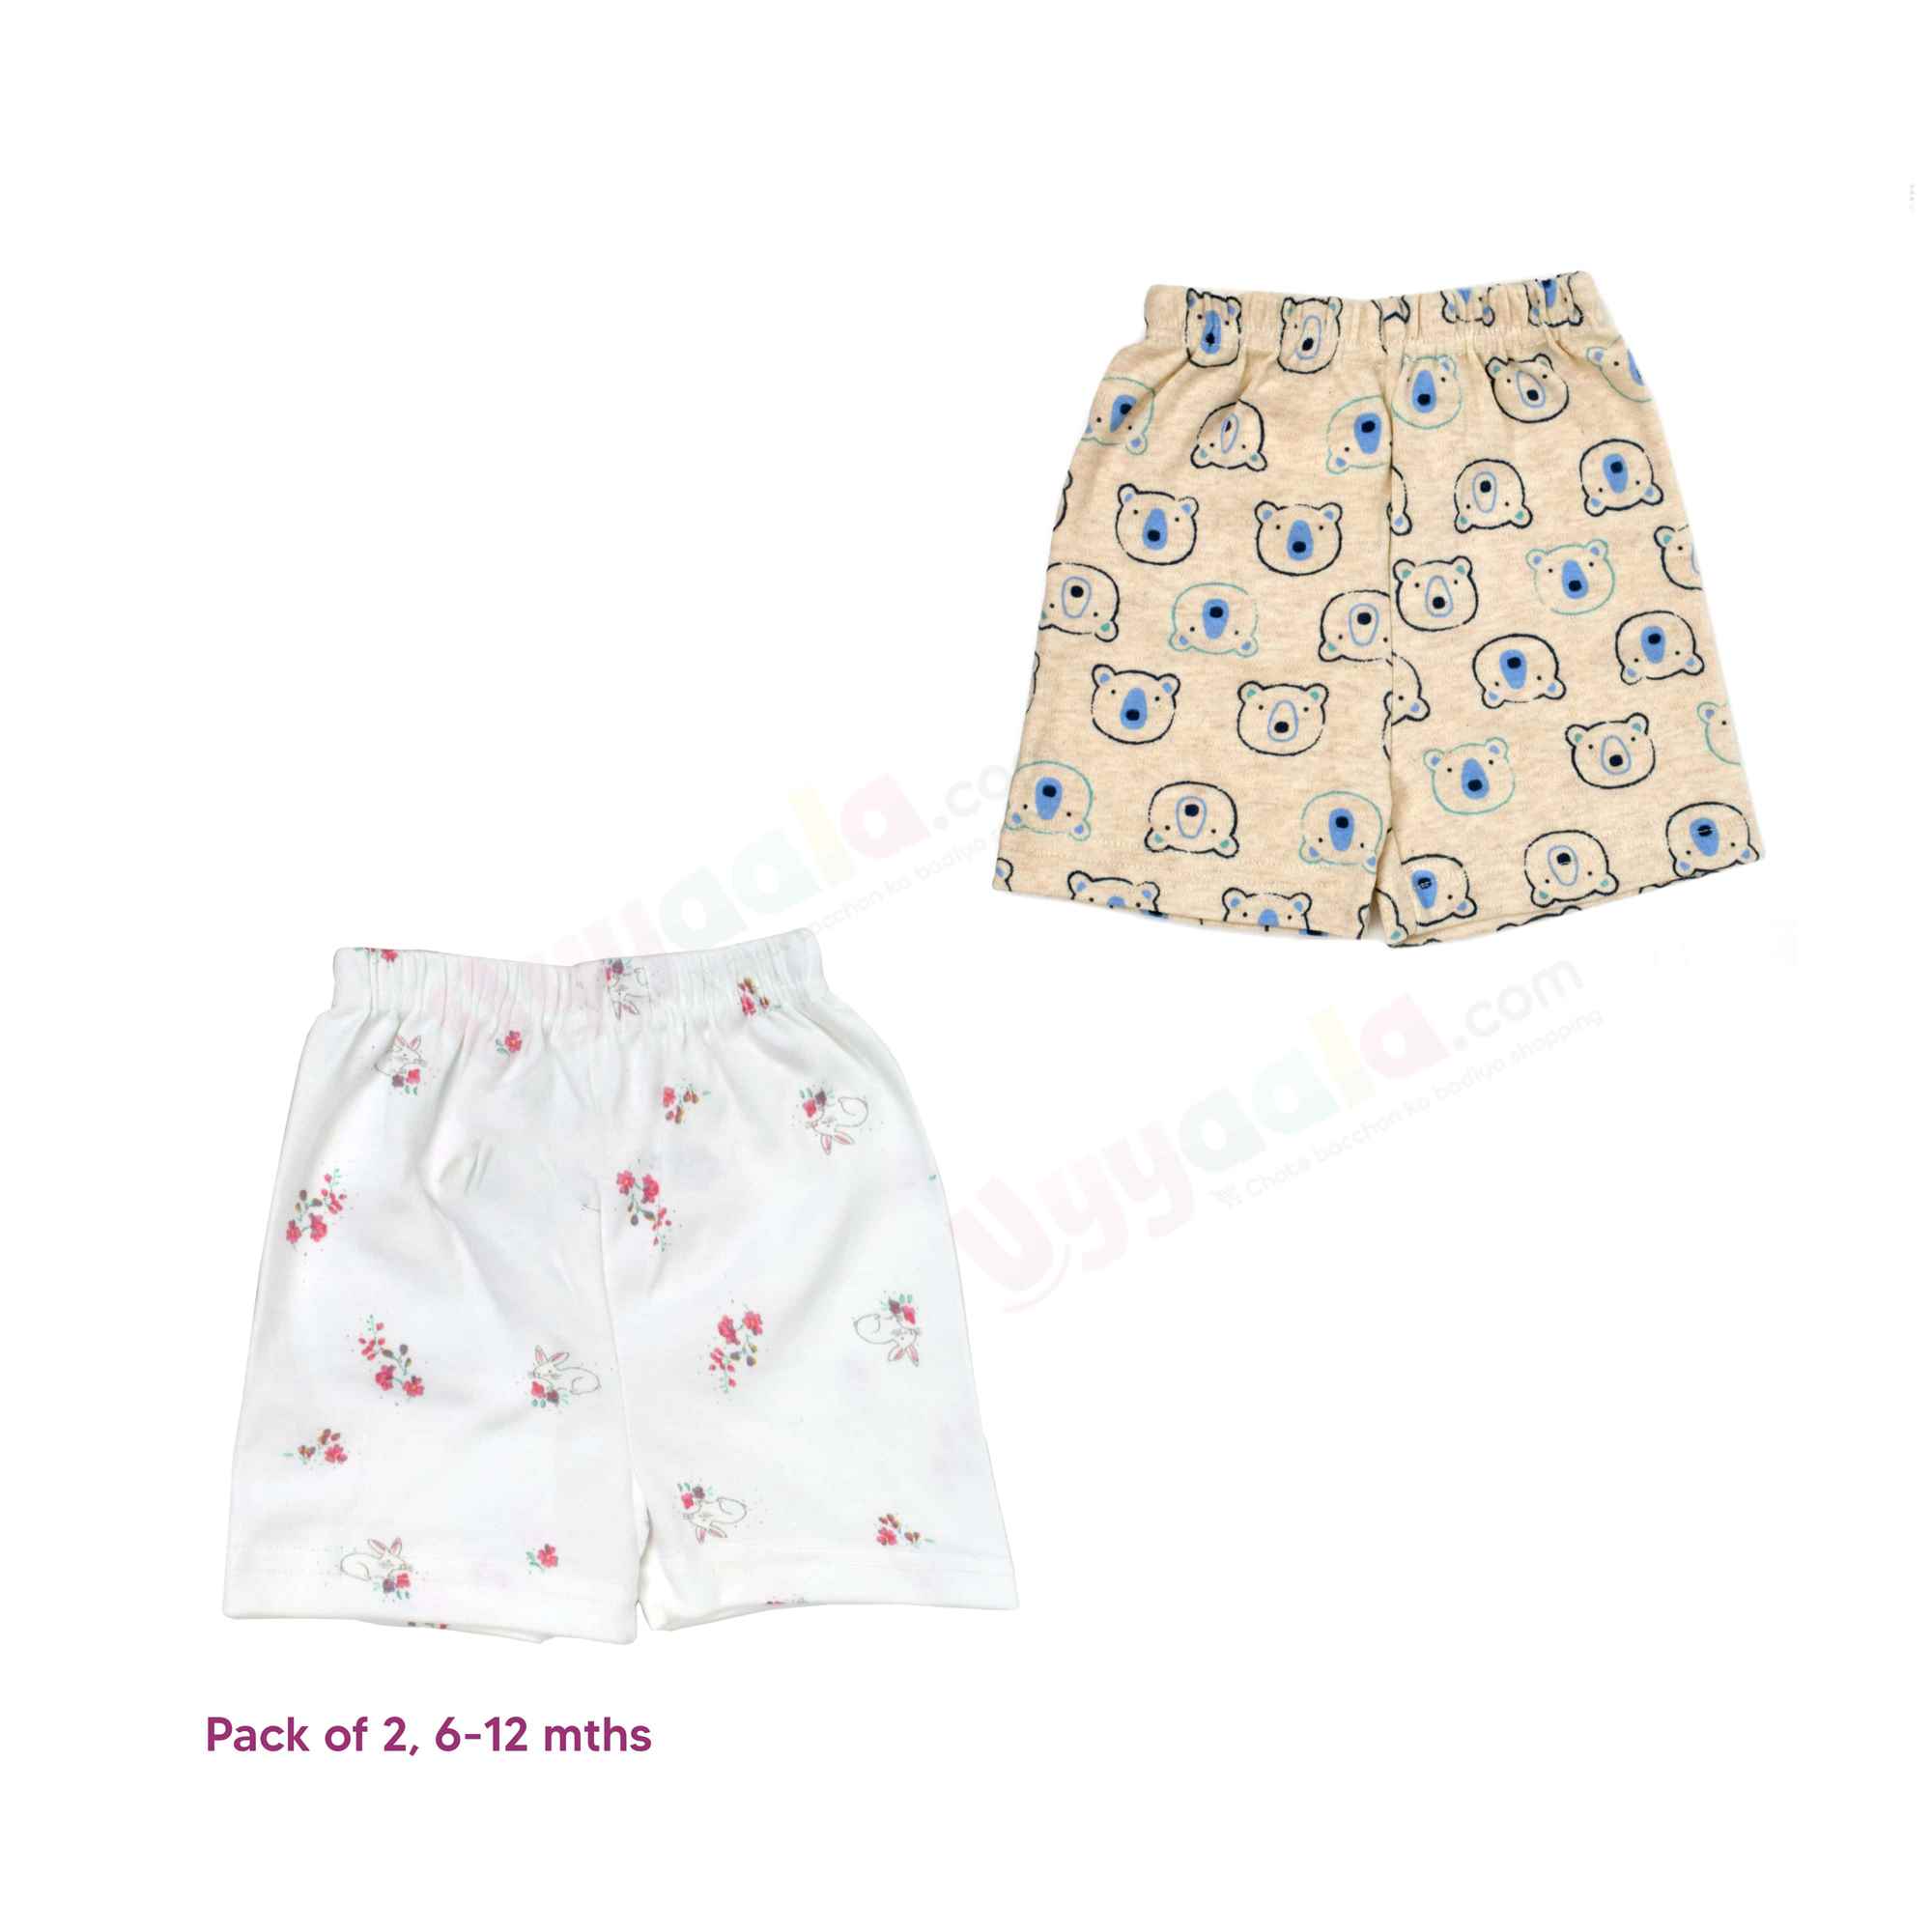 PRECIOUS ONE shorts 100% soft hosiery cotton pack of 2 - white & cream with assorted prints (6-12m)